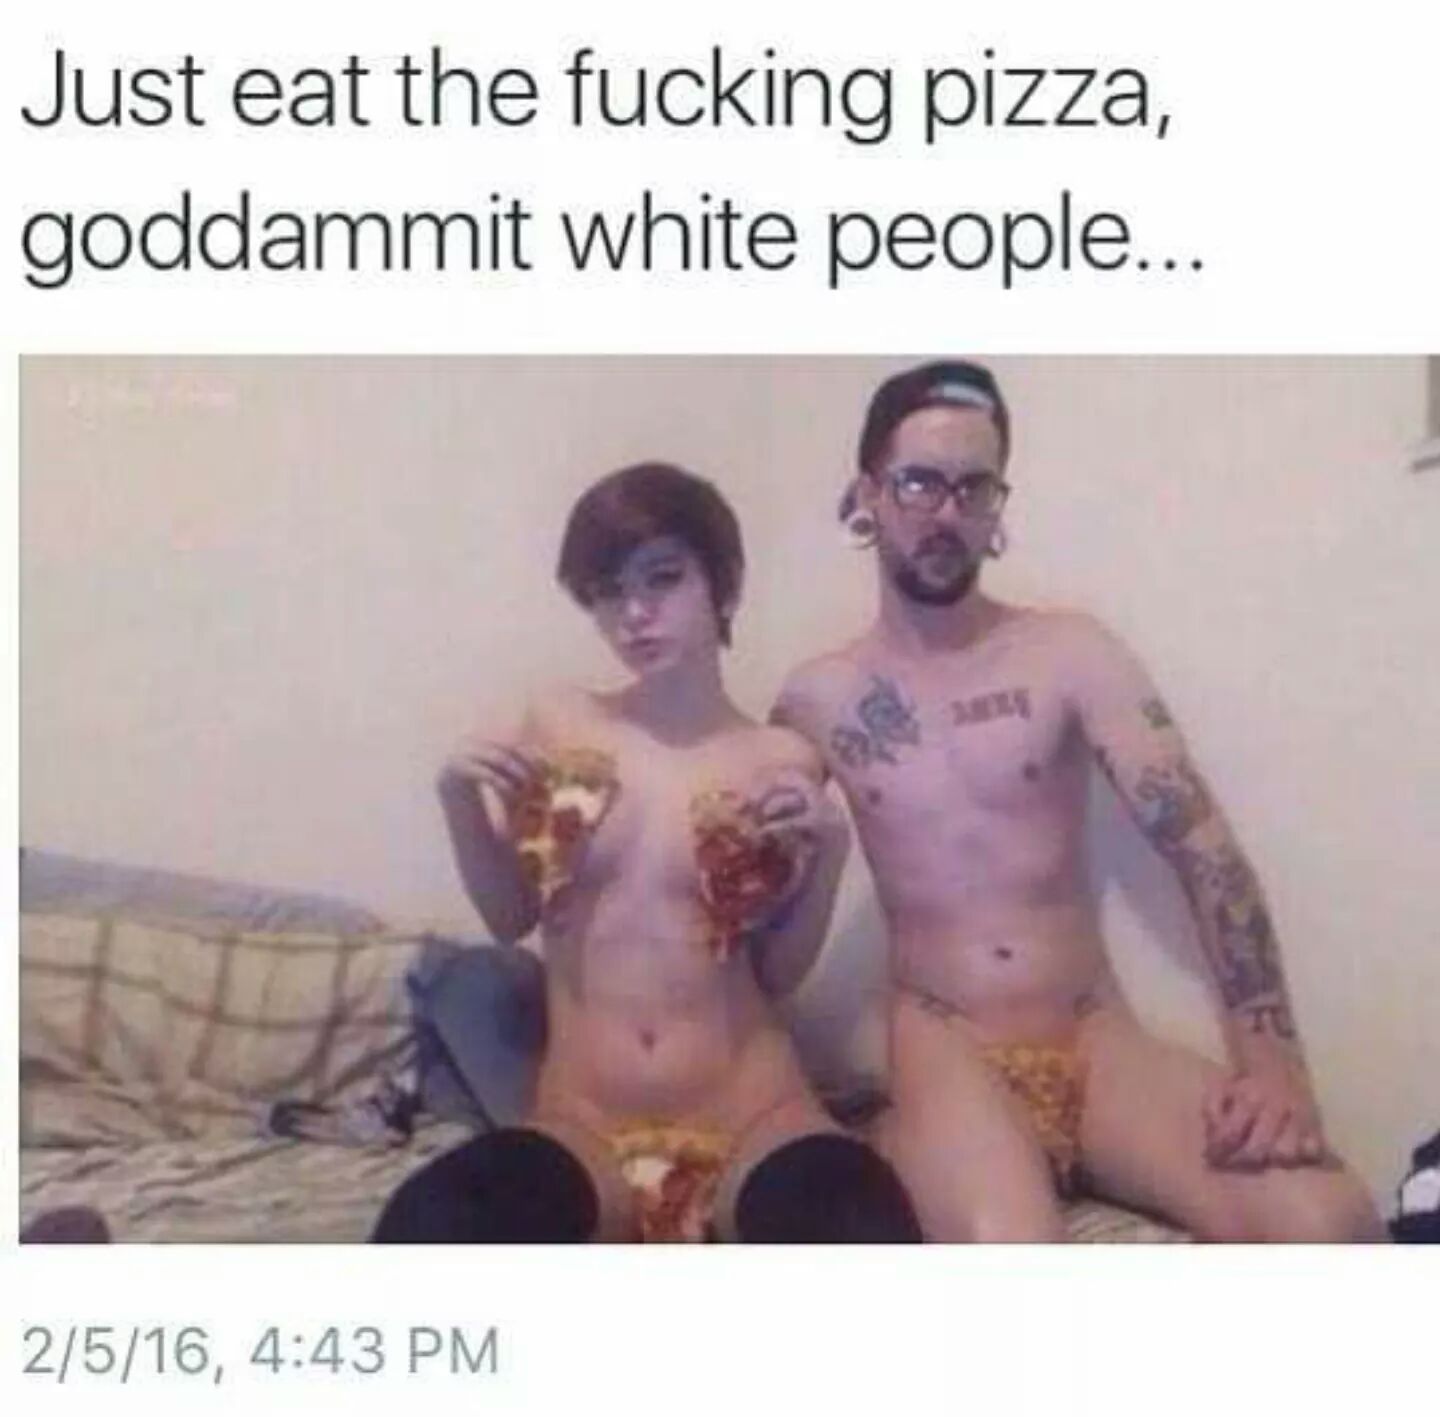 Dank meme poking fun at how white people can't just eat the pizza, but have to pose in all sorts of strange poses first.